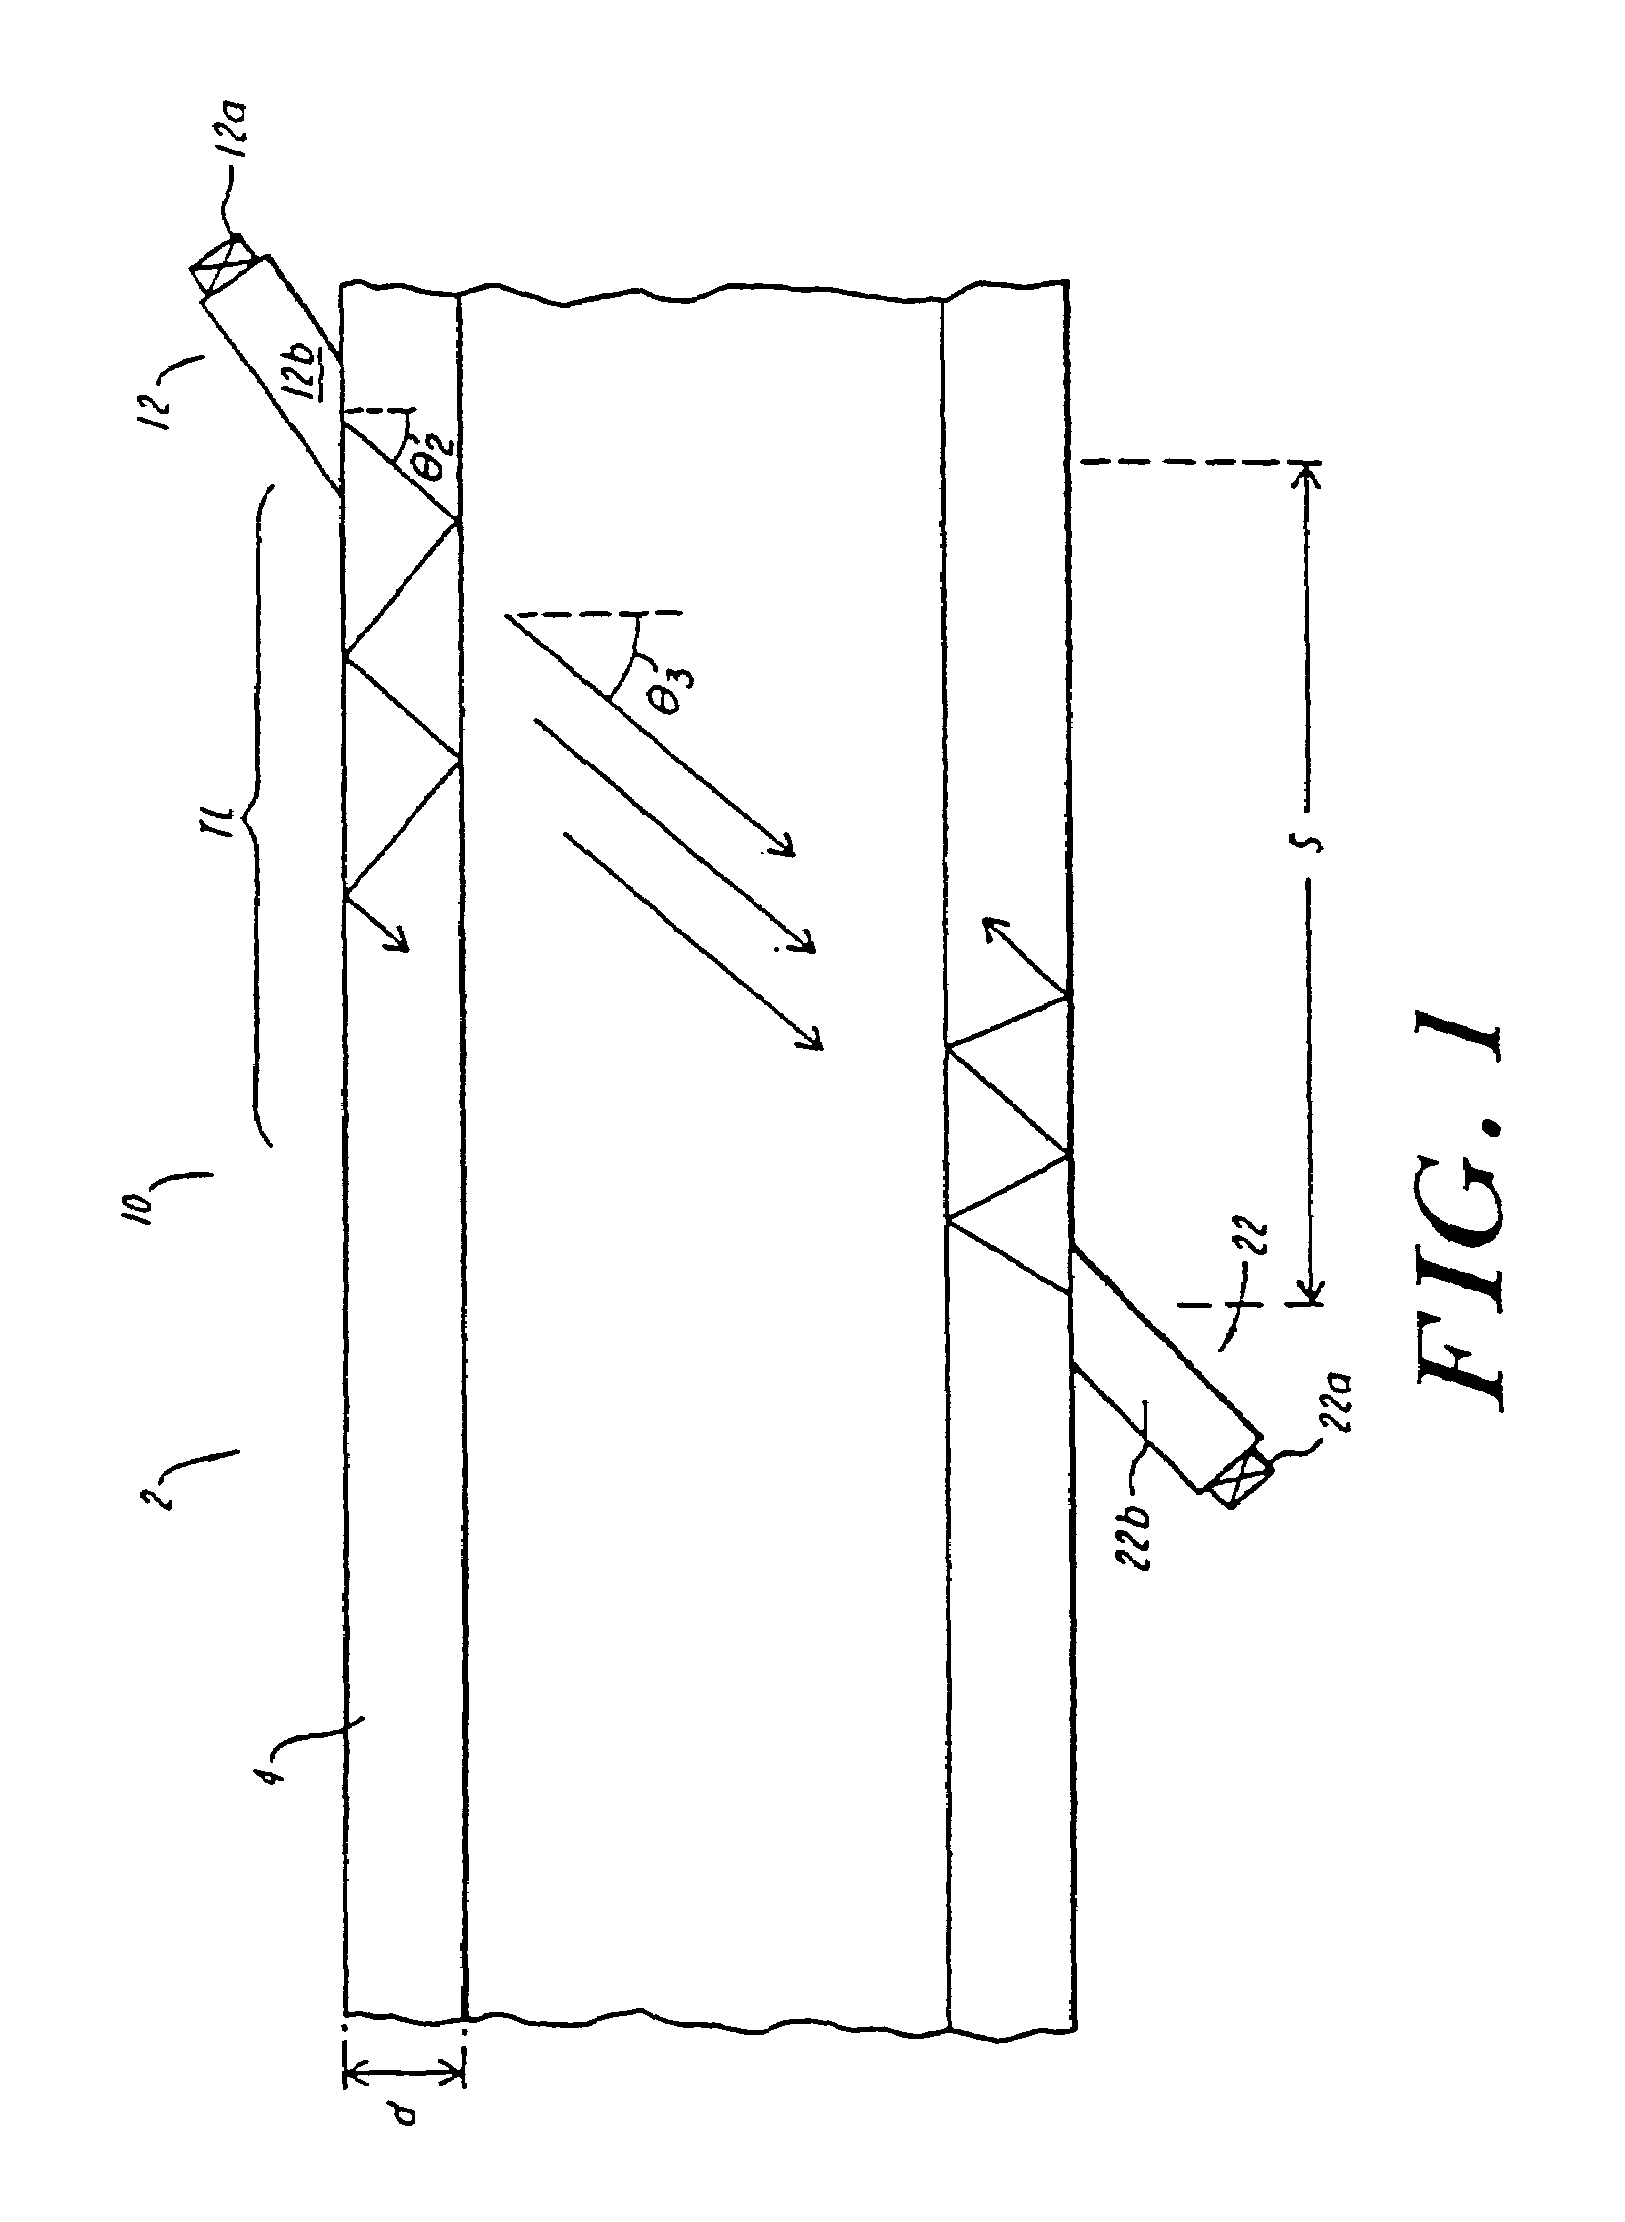 Flow measurement system with reduced noise and crosstalk